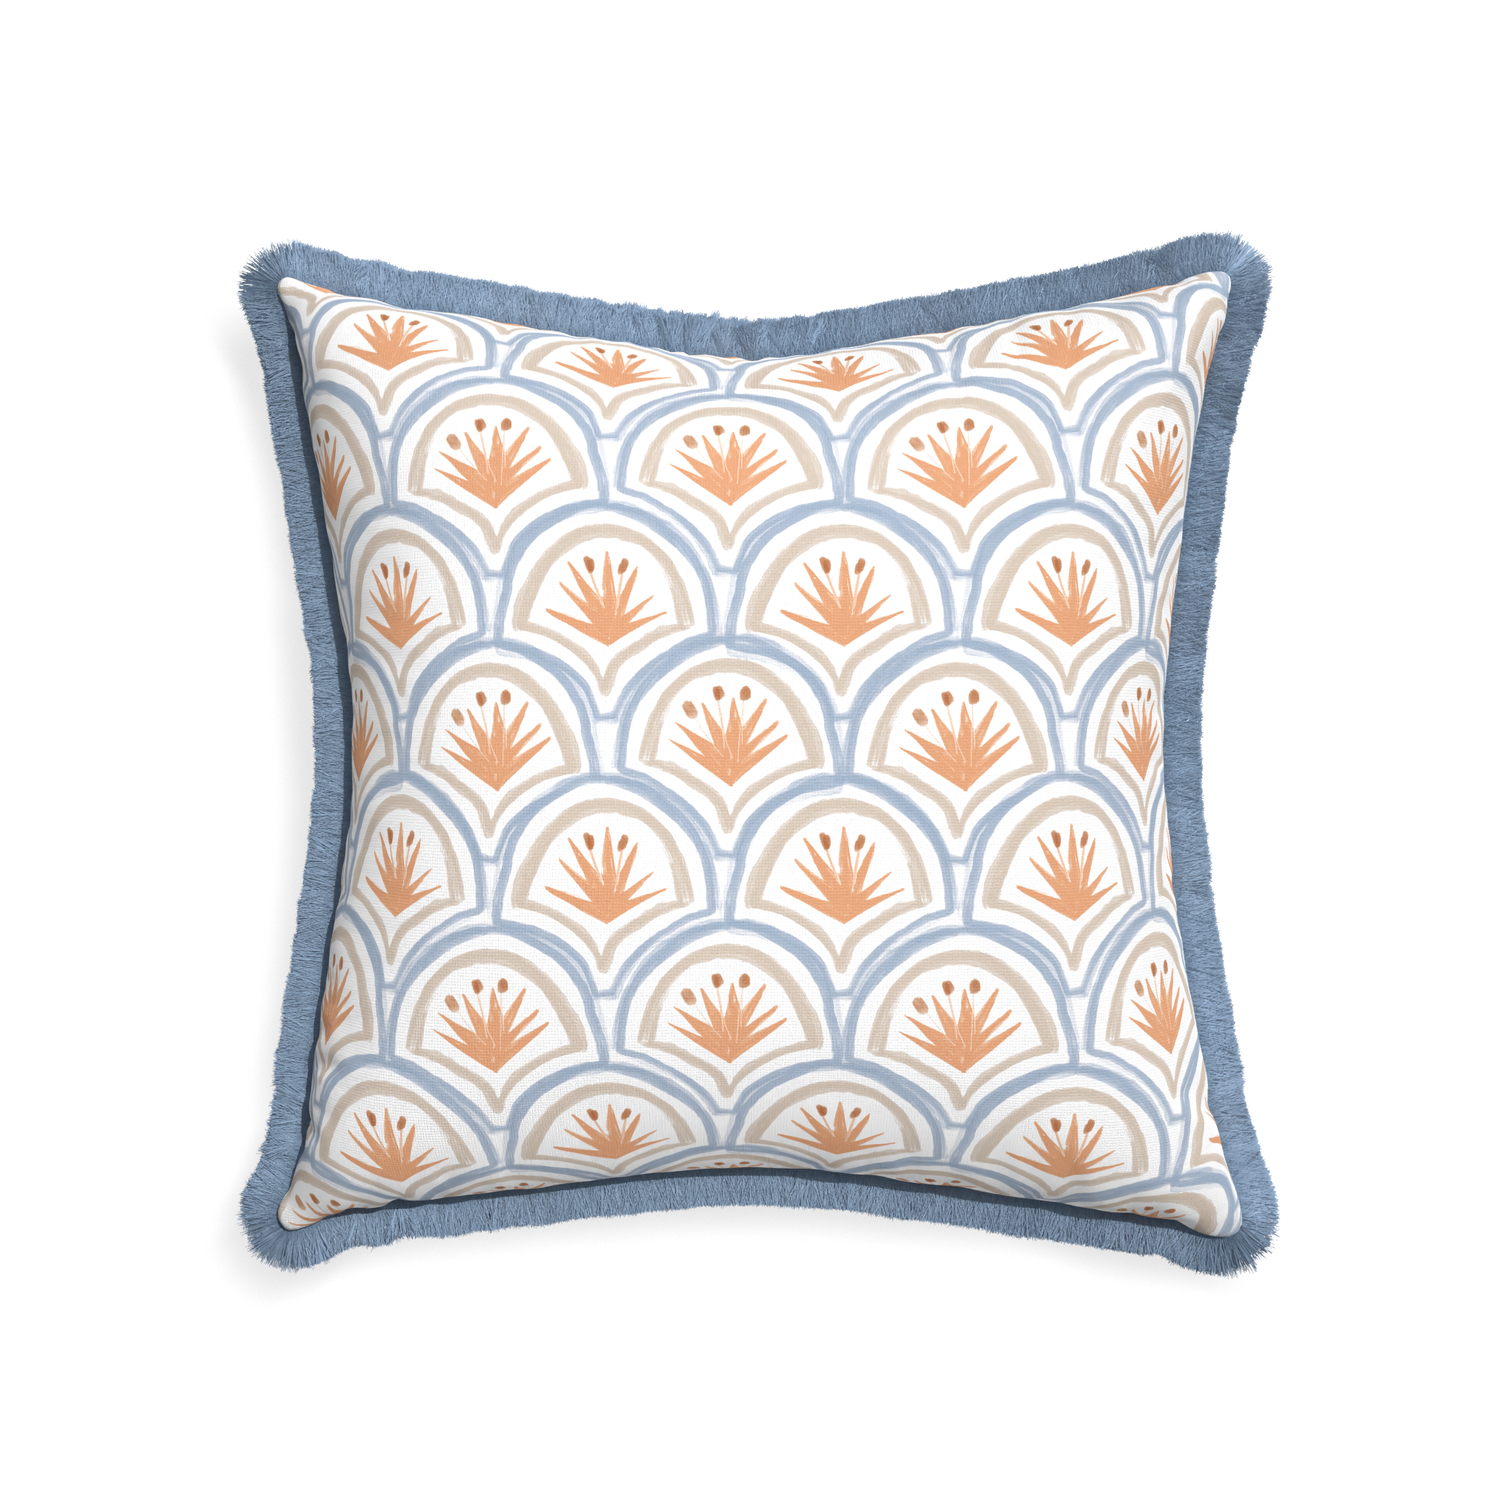 22-square thatcher apricot custom art deco palm patternpillow with sky fringe on white background